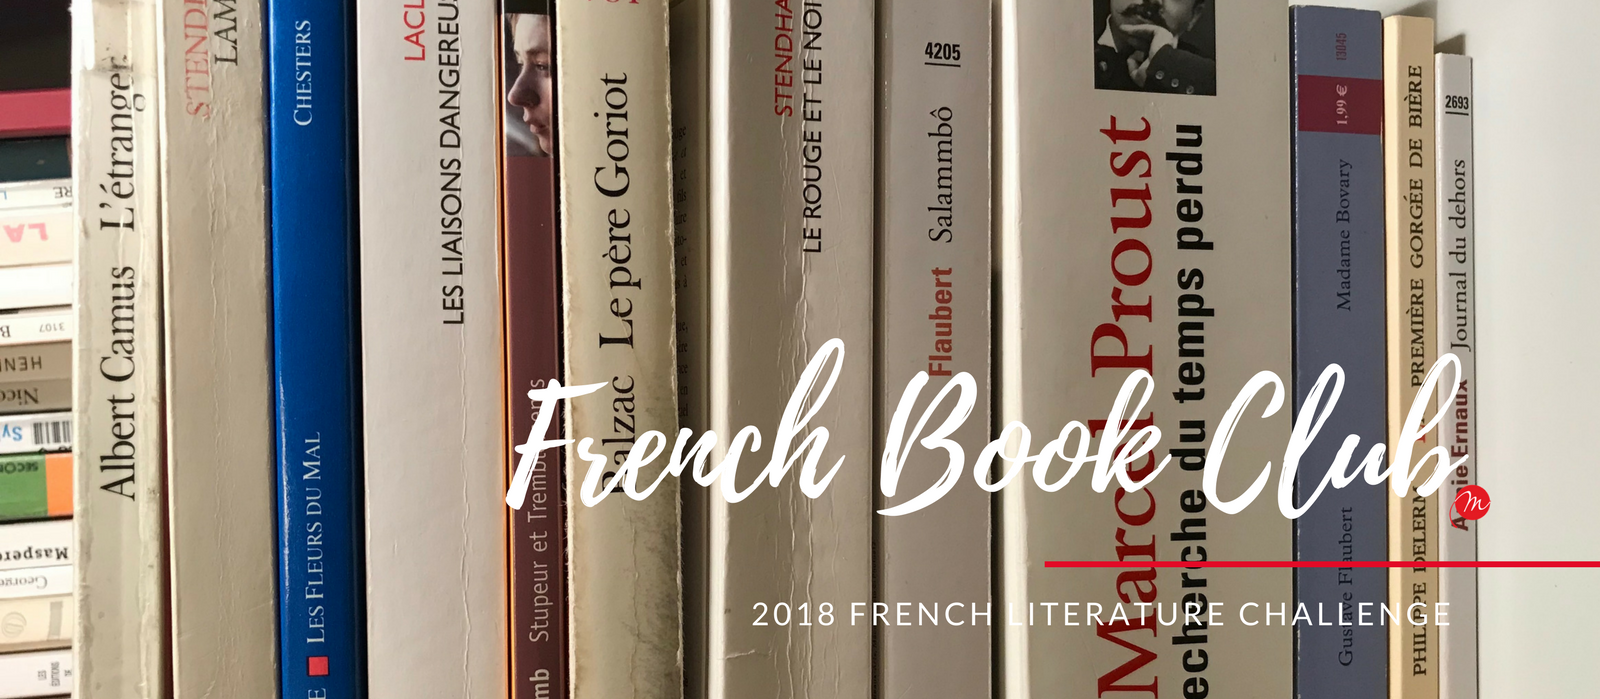 MyFrenchLife™ – MyFrenchLife.org – MyFrenchLife™ book club: April literature challenge – Marcel Proust - Un armour de Swann